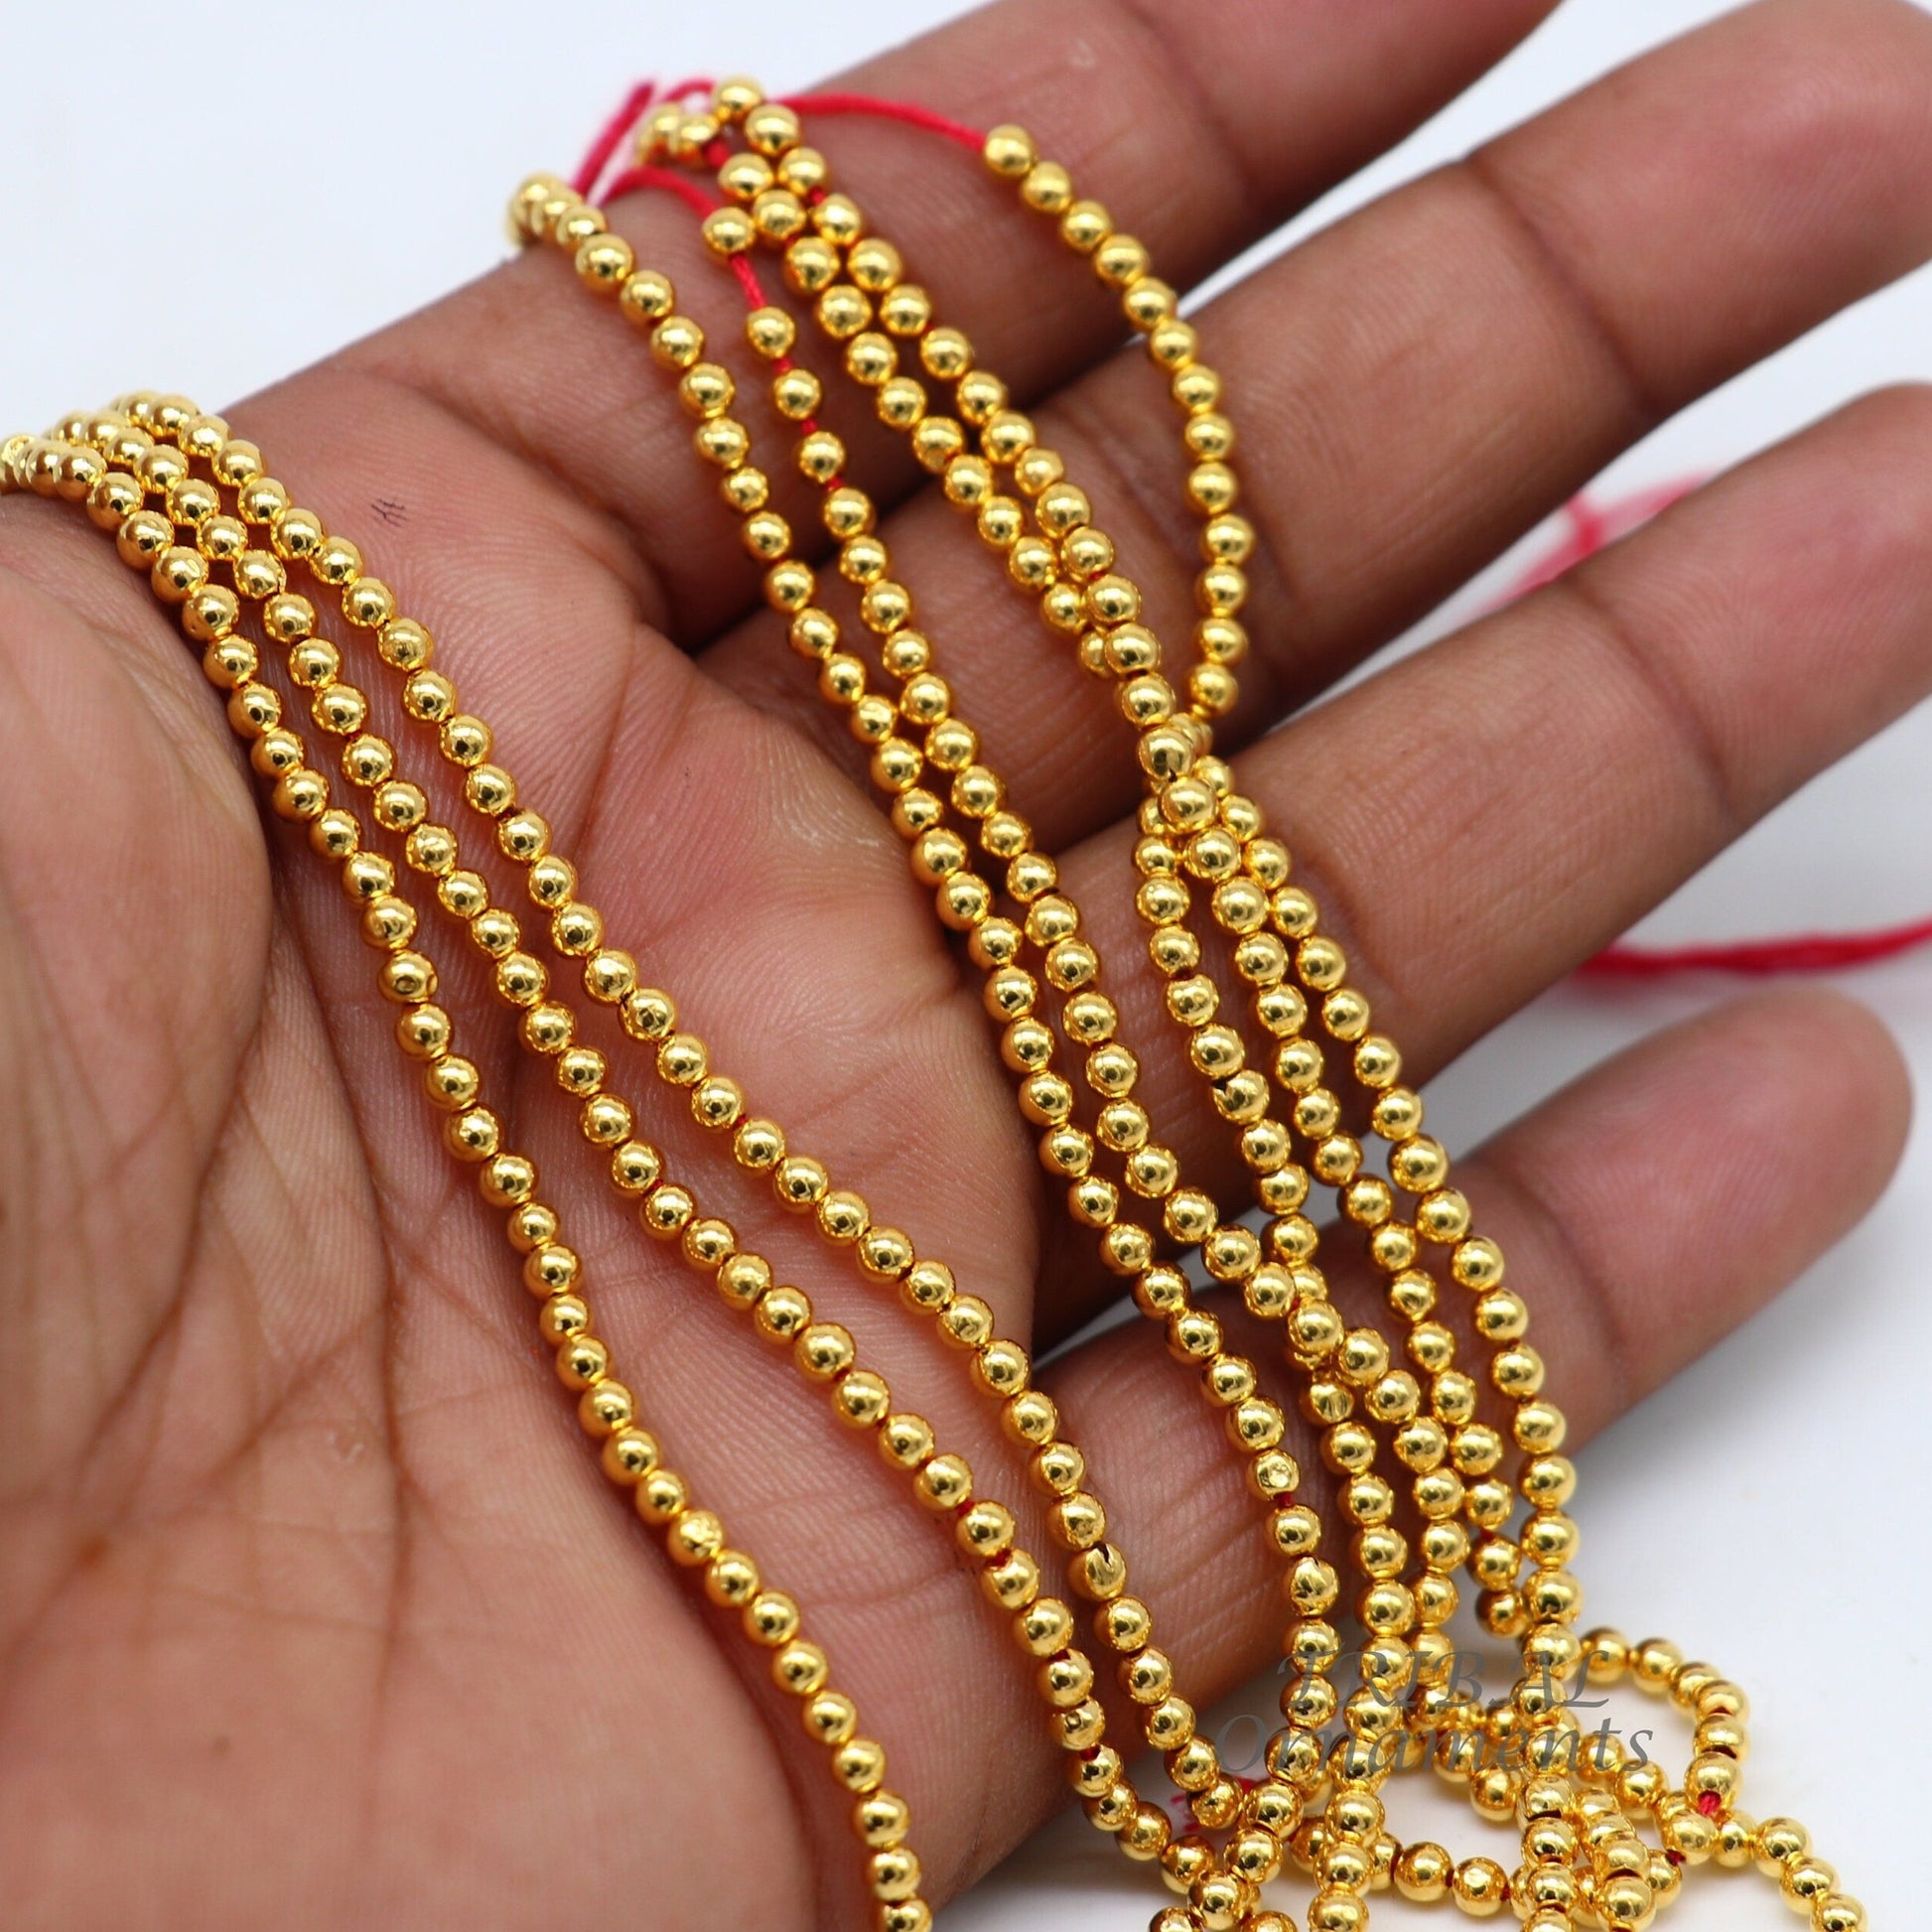 lot 20 pieces 3mm gold beads Vintage handmade loose beads ethnic designer 22k yellow gold beads or ball for custom jewelry making bd25 - TRIBAL ORNAMENTS